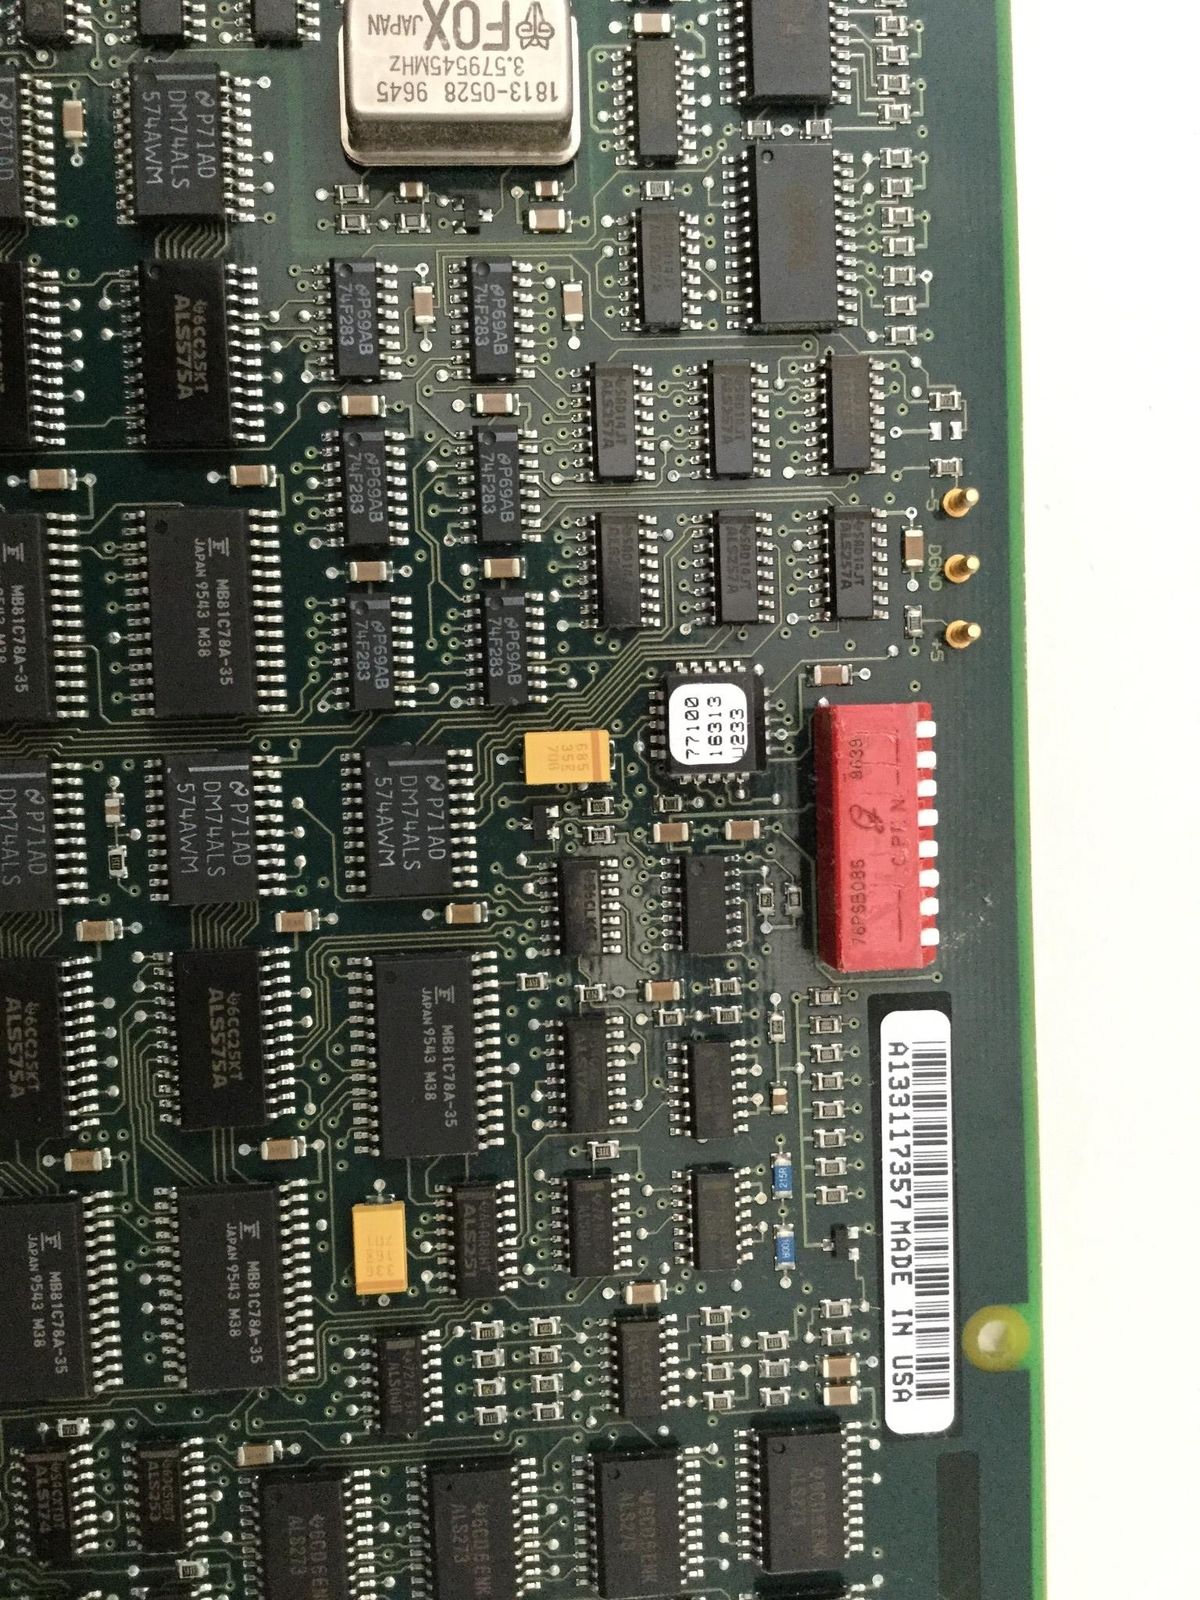 a close up of a computer board with many electronic components